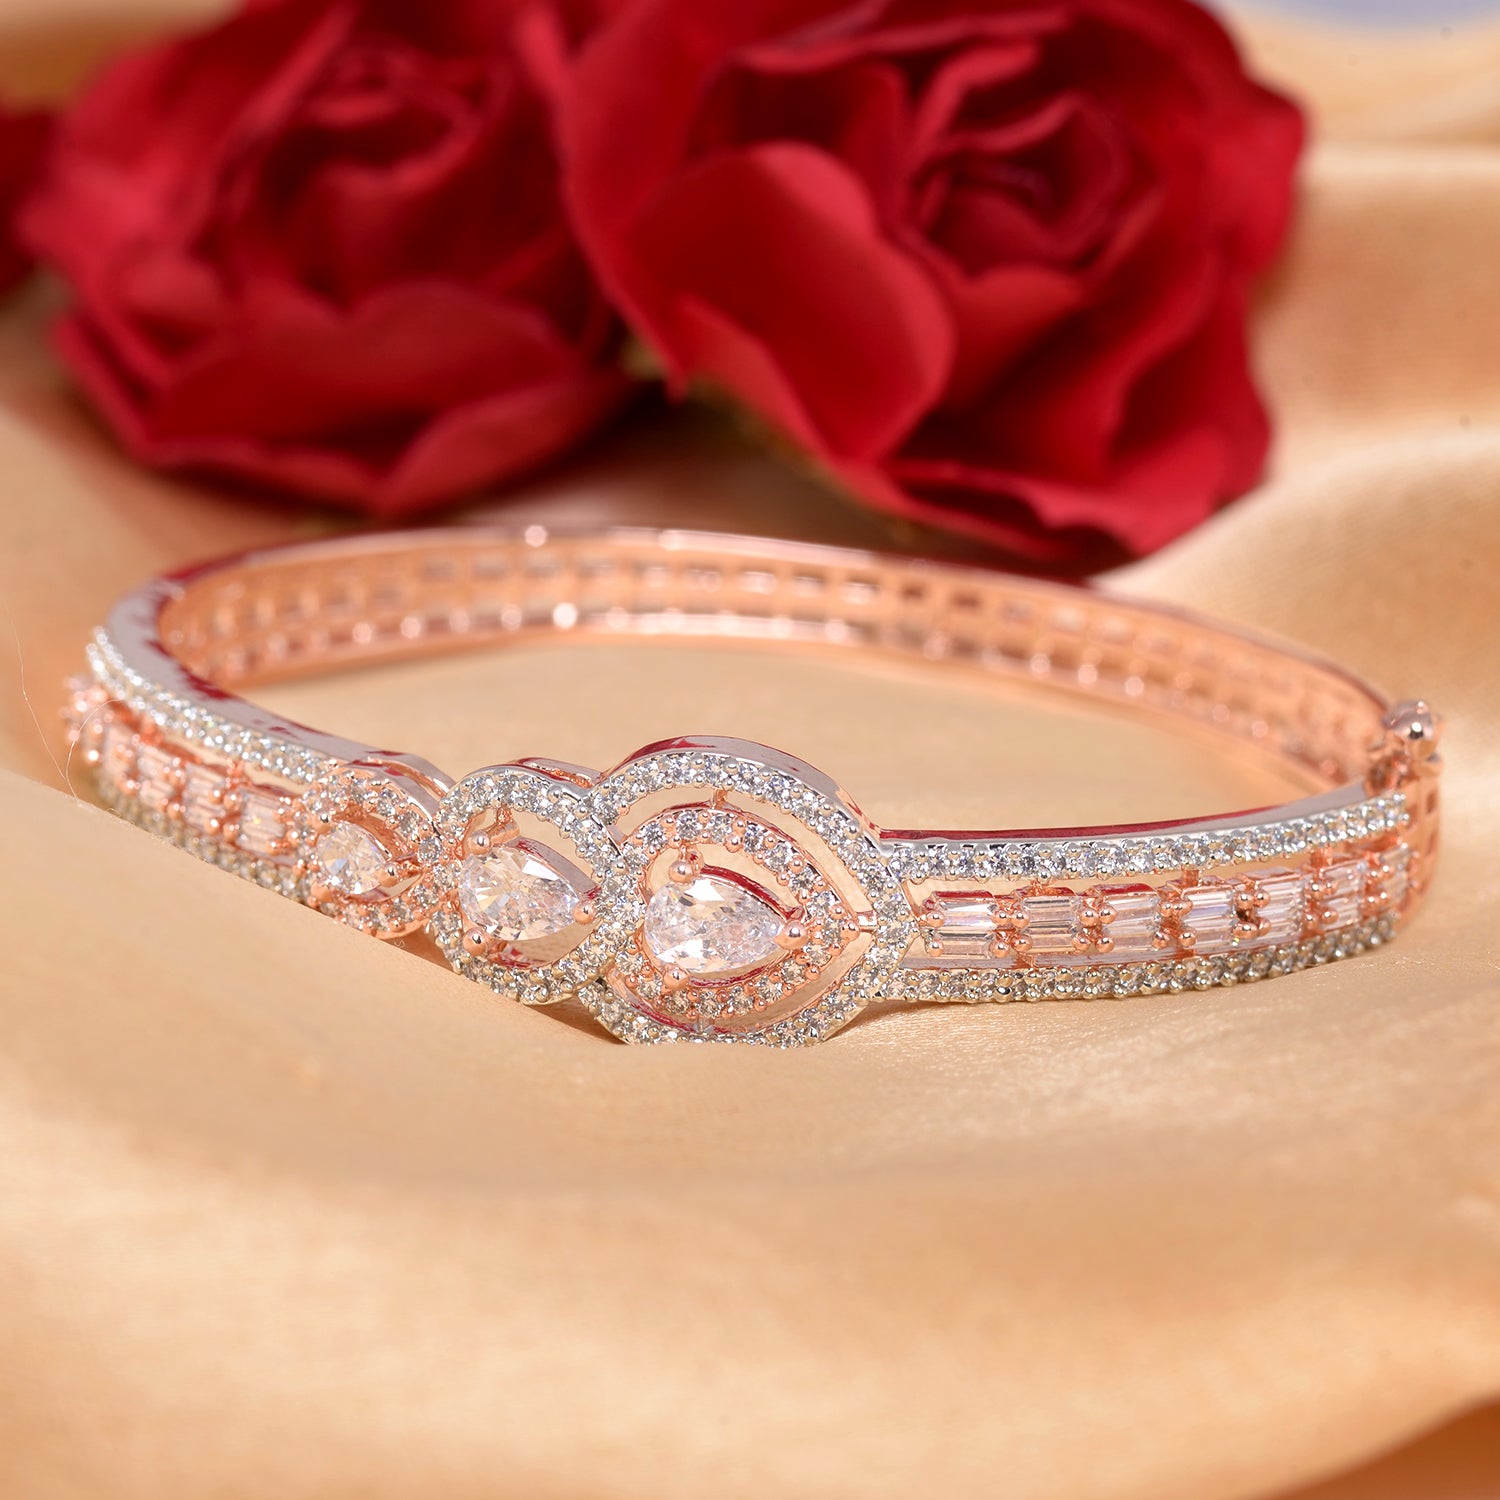 Drop Design Diamond Studded Bracelet,Rose Gold Plated For Women And Girls - Saraf Rs Jewellery